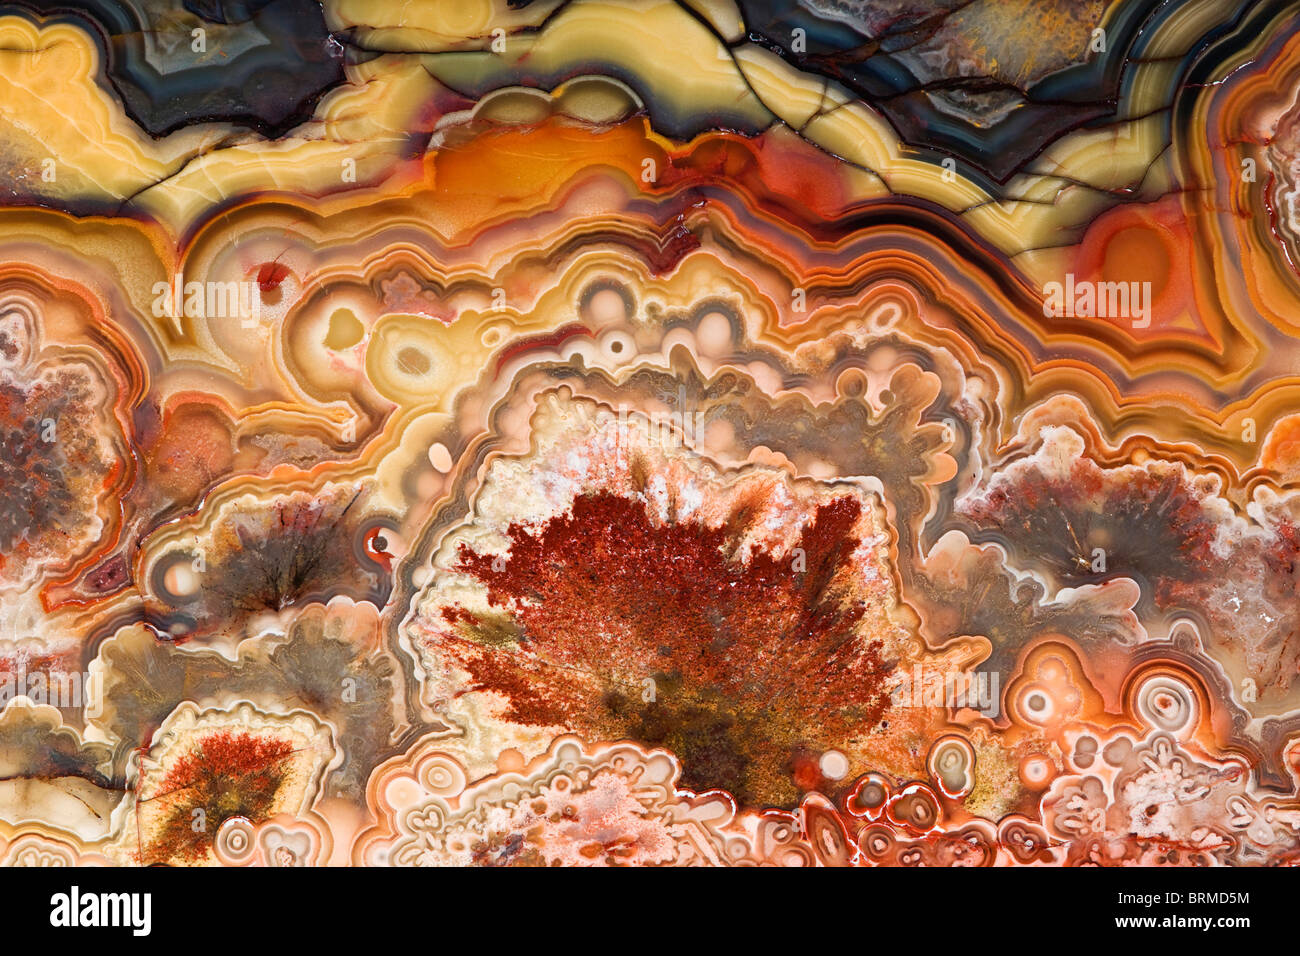 Mexico. Close-up of Crazy Lace Agate stone. Stock Photo